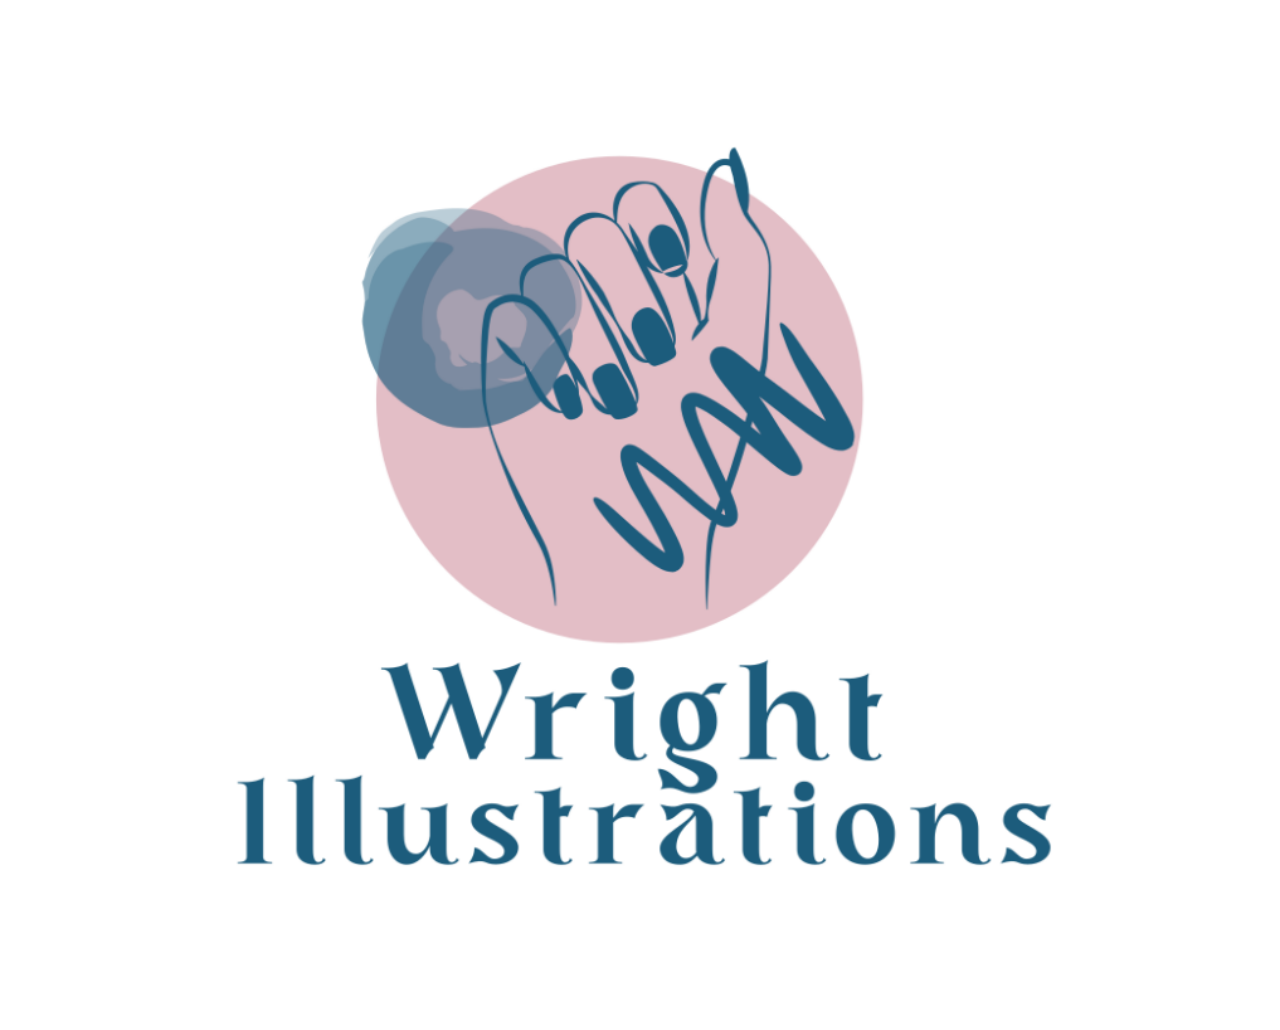 Wright Illustrations's web page